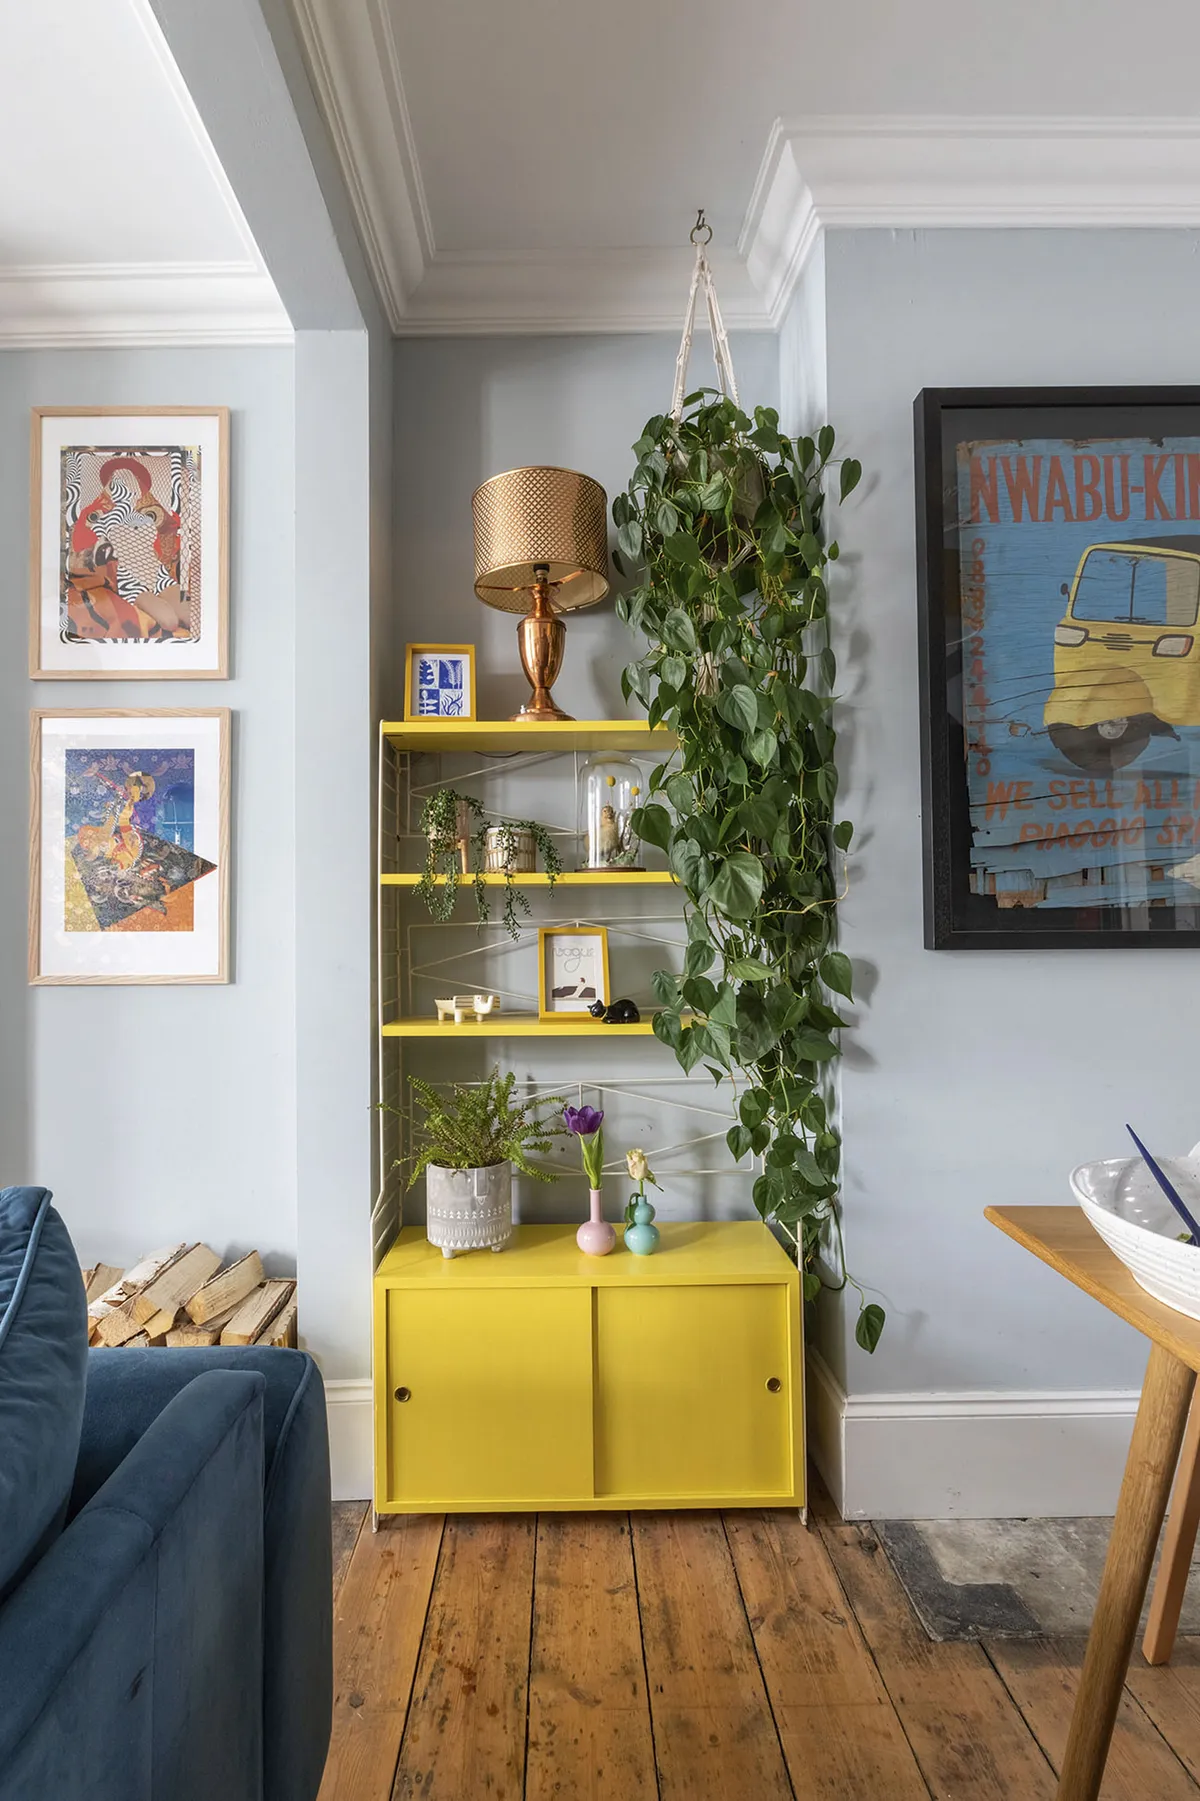 Carey has injected colour into her scheme by painting existing pieces, including her much-loved Scandinavian string shelves, which have been given a coat of Dulux’s Sulphur Springs